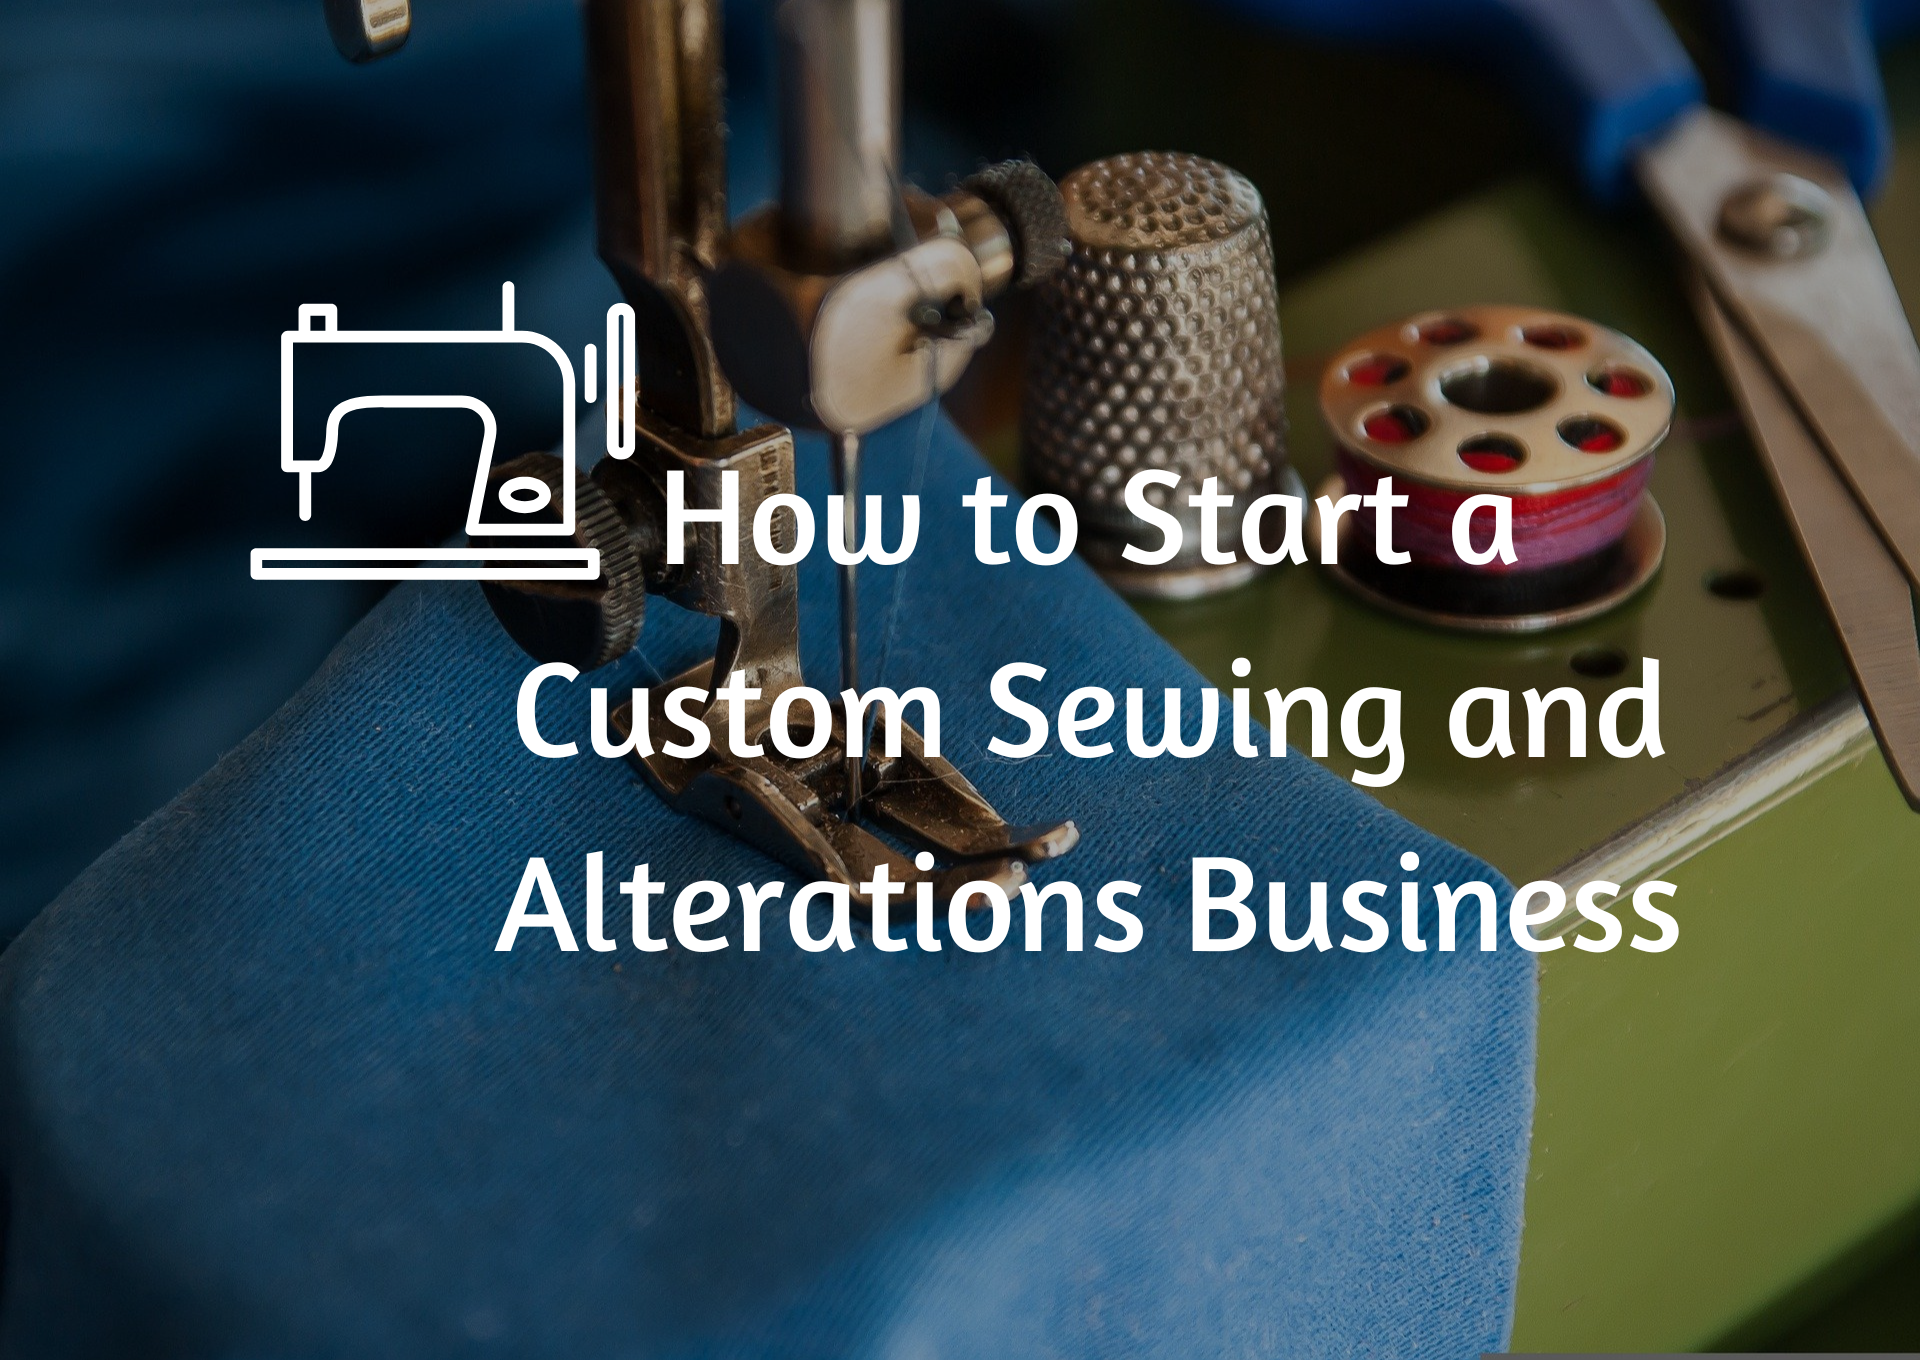 How to Start a Custom Sewing and Alterations Business